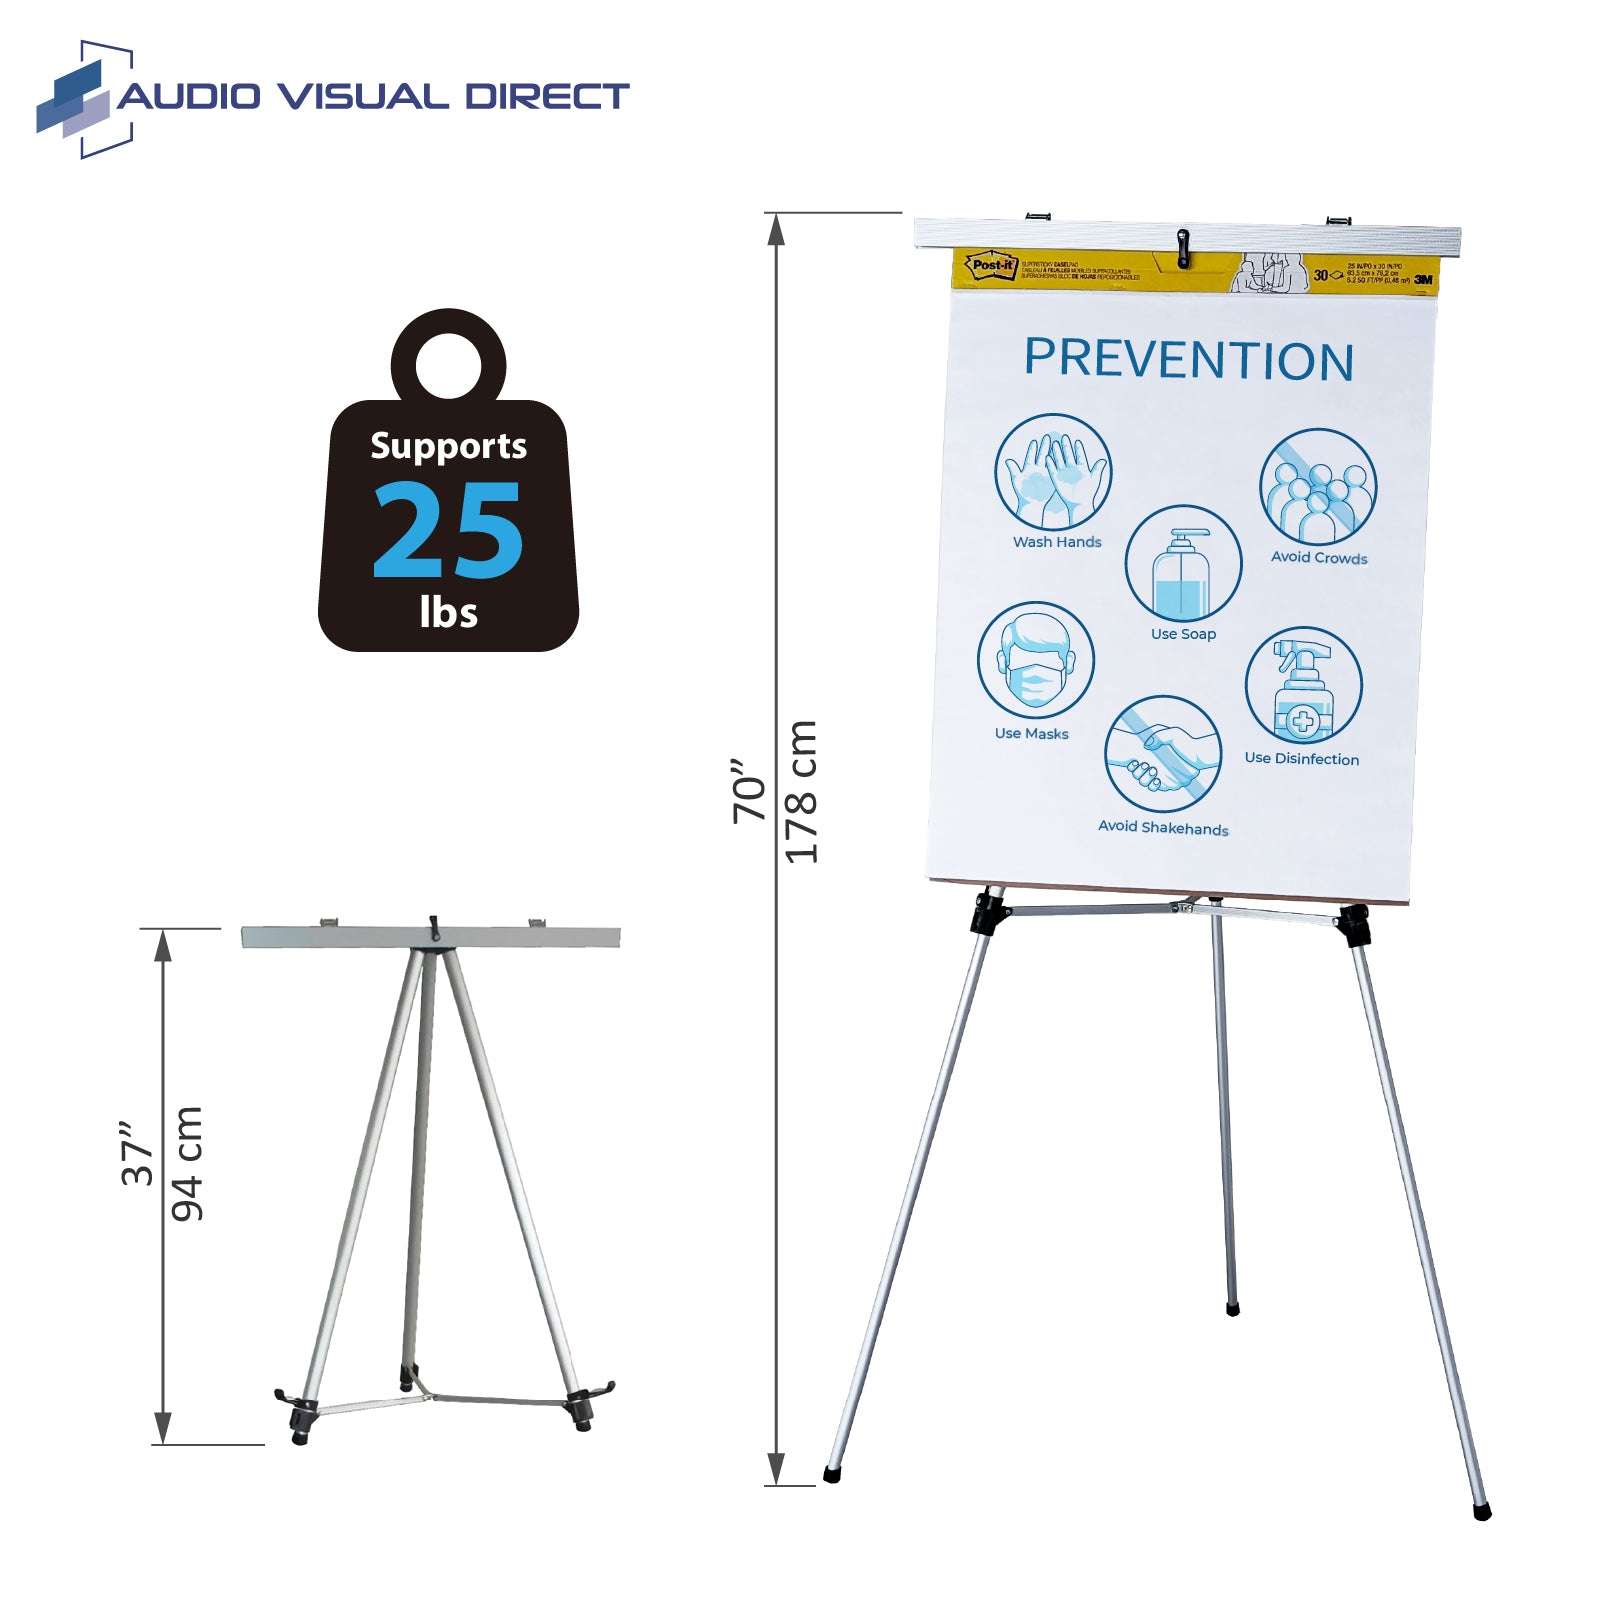 Info Graphic for our presentation easel. Shows the height from 37" to 70". Also shows it can support up to 25 lbs.